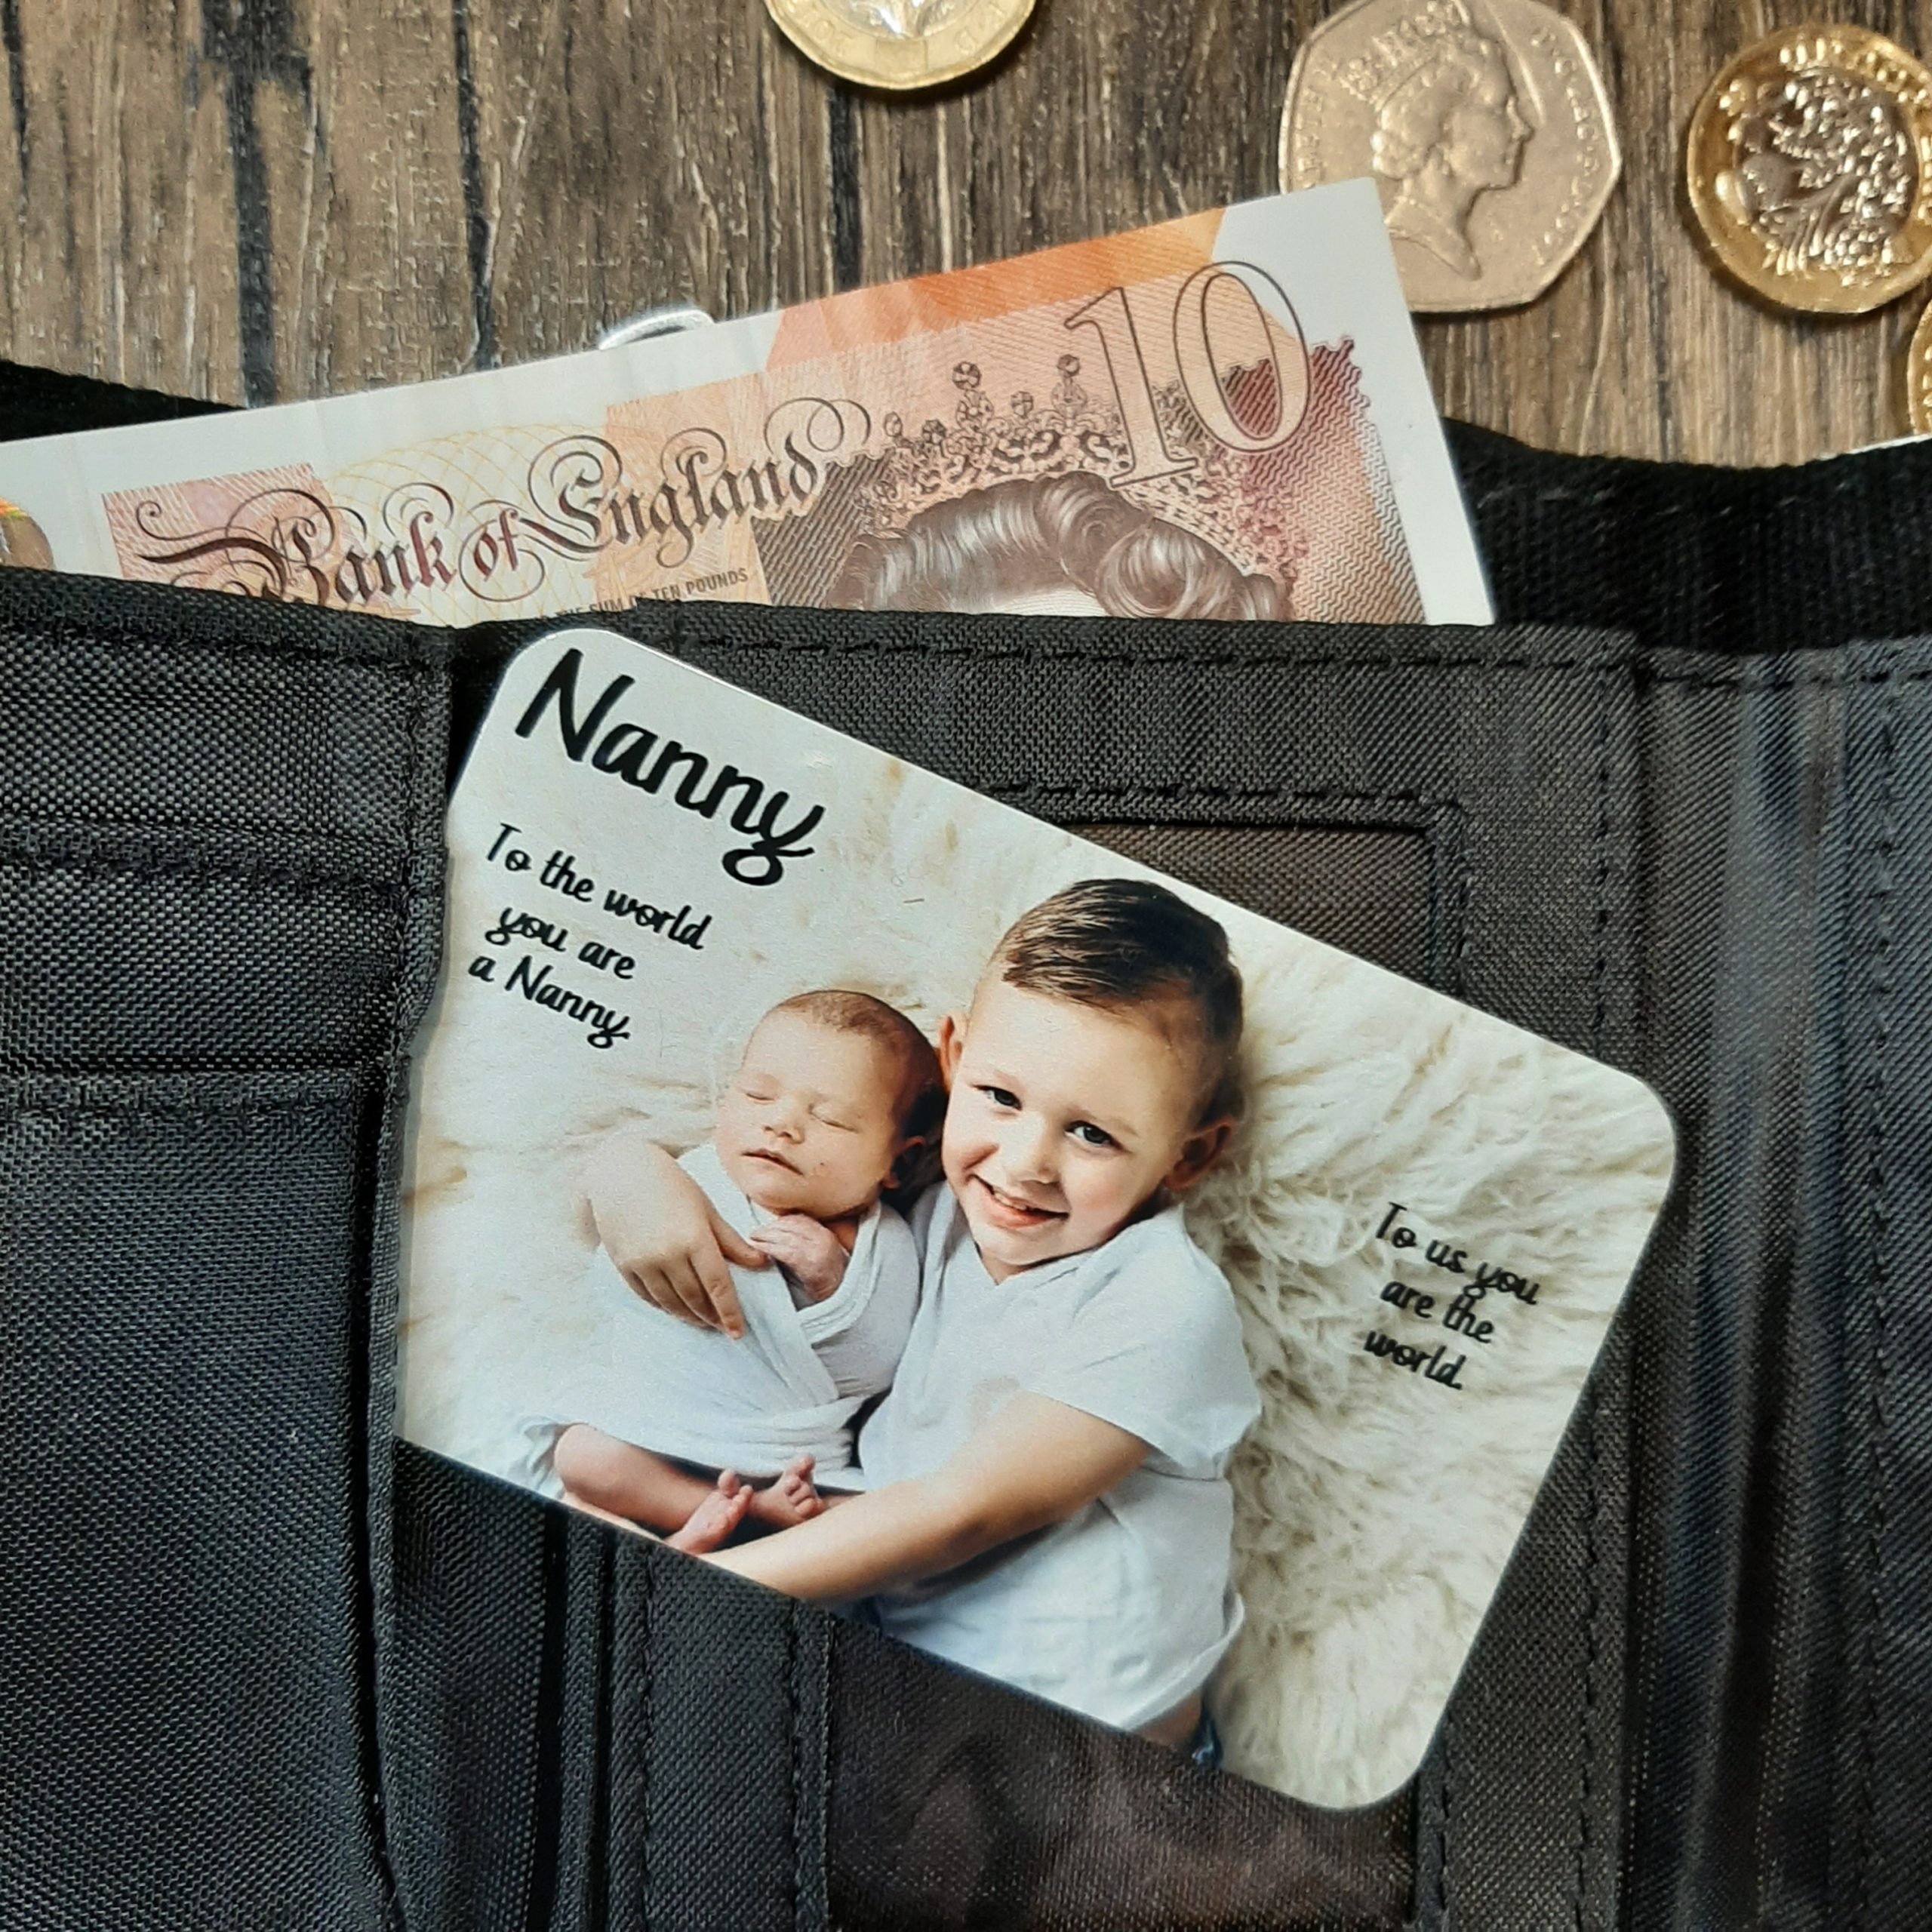 Aluminum Wallet Photo Card - lovely family photo printed with personalised message pocking out of a wallet purse